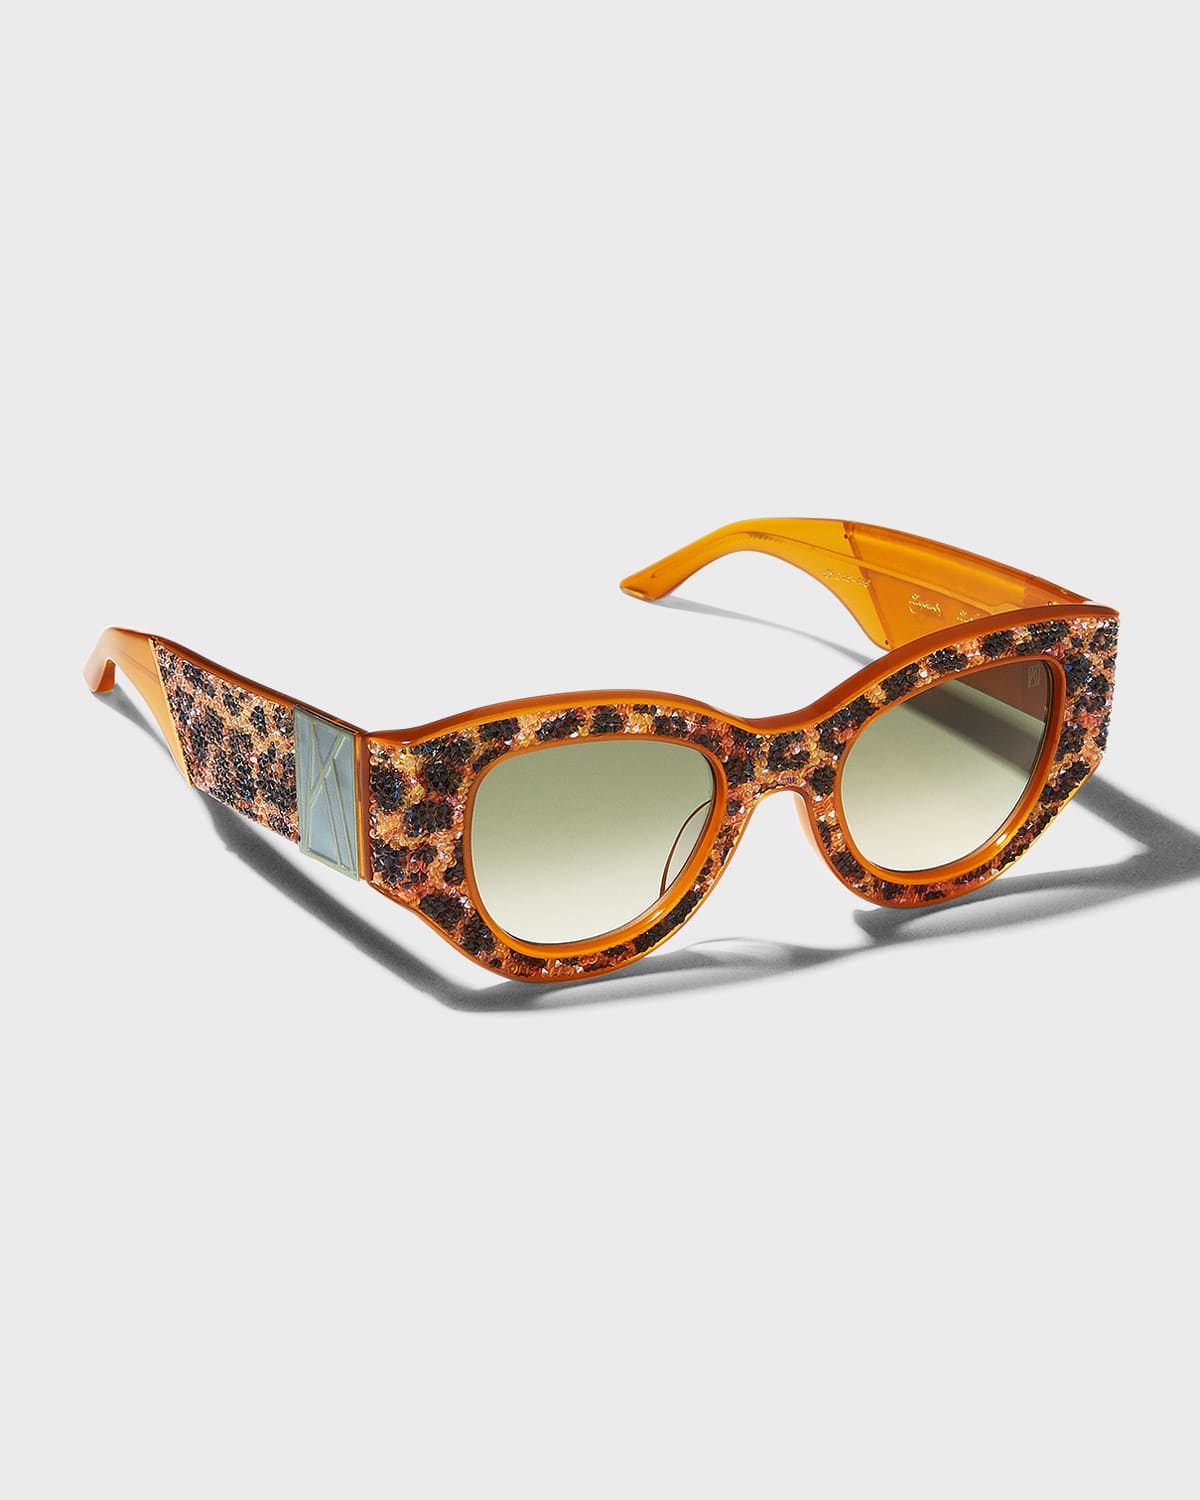 ANNA-KARIN KARLSSON LUCKY GOES TO VEGAS CRYSTALS & ACETATE CAT-EYE SUNGLASSES